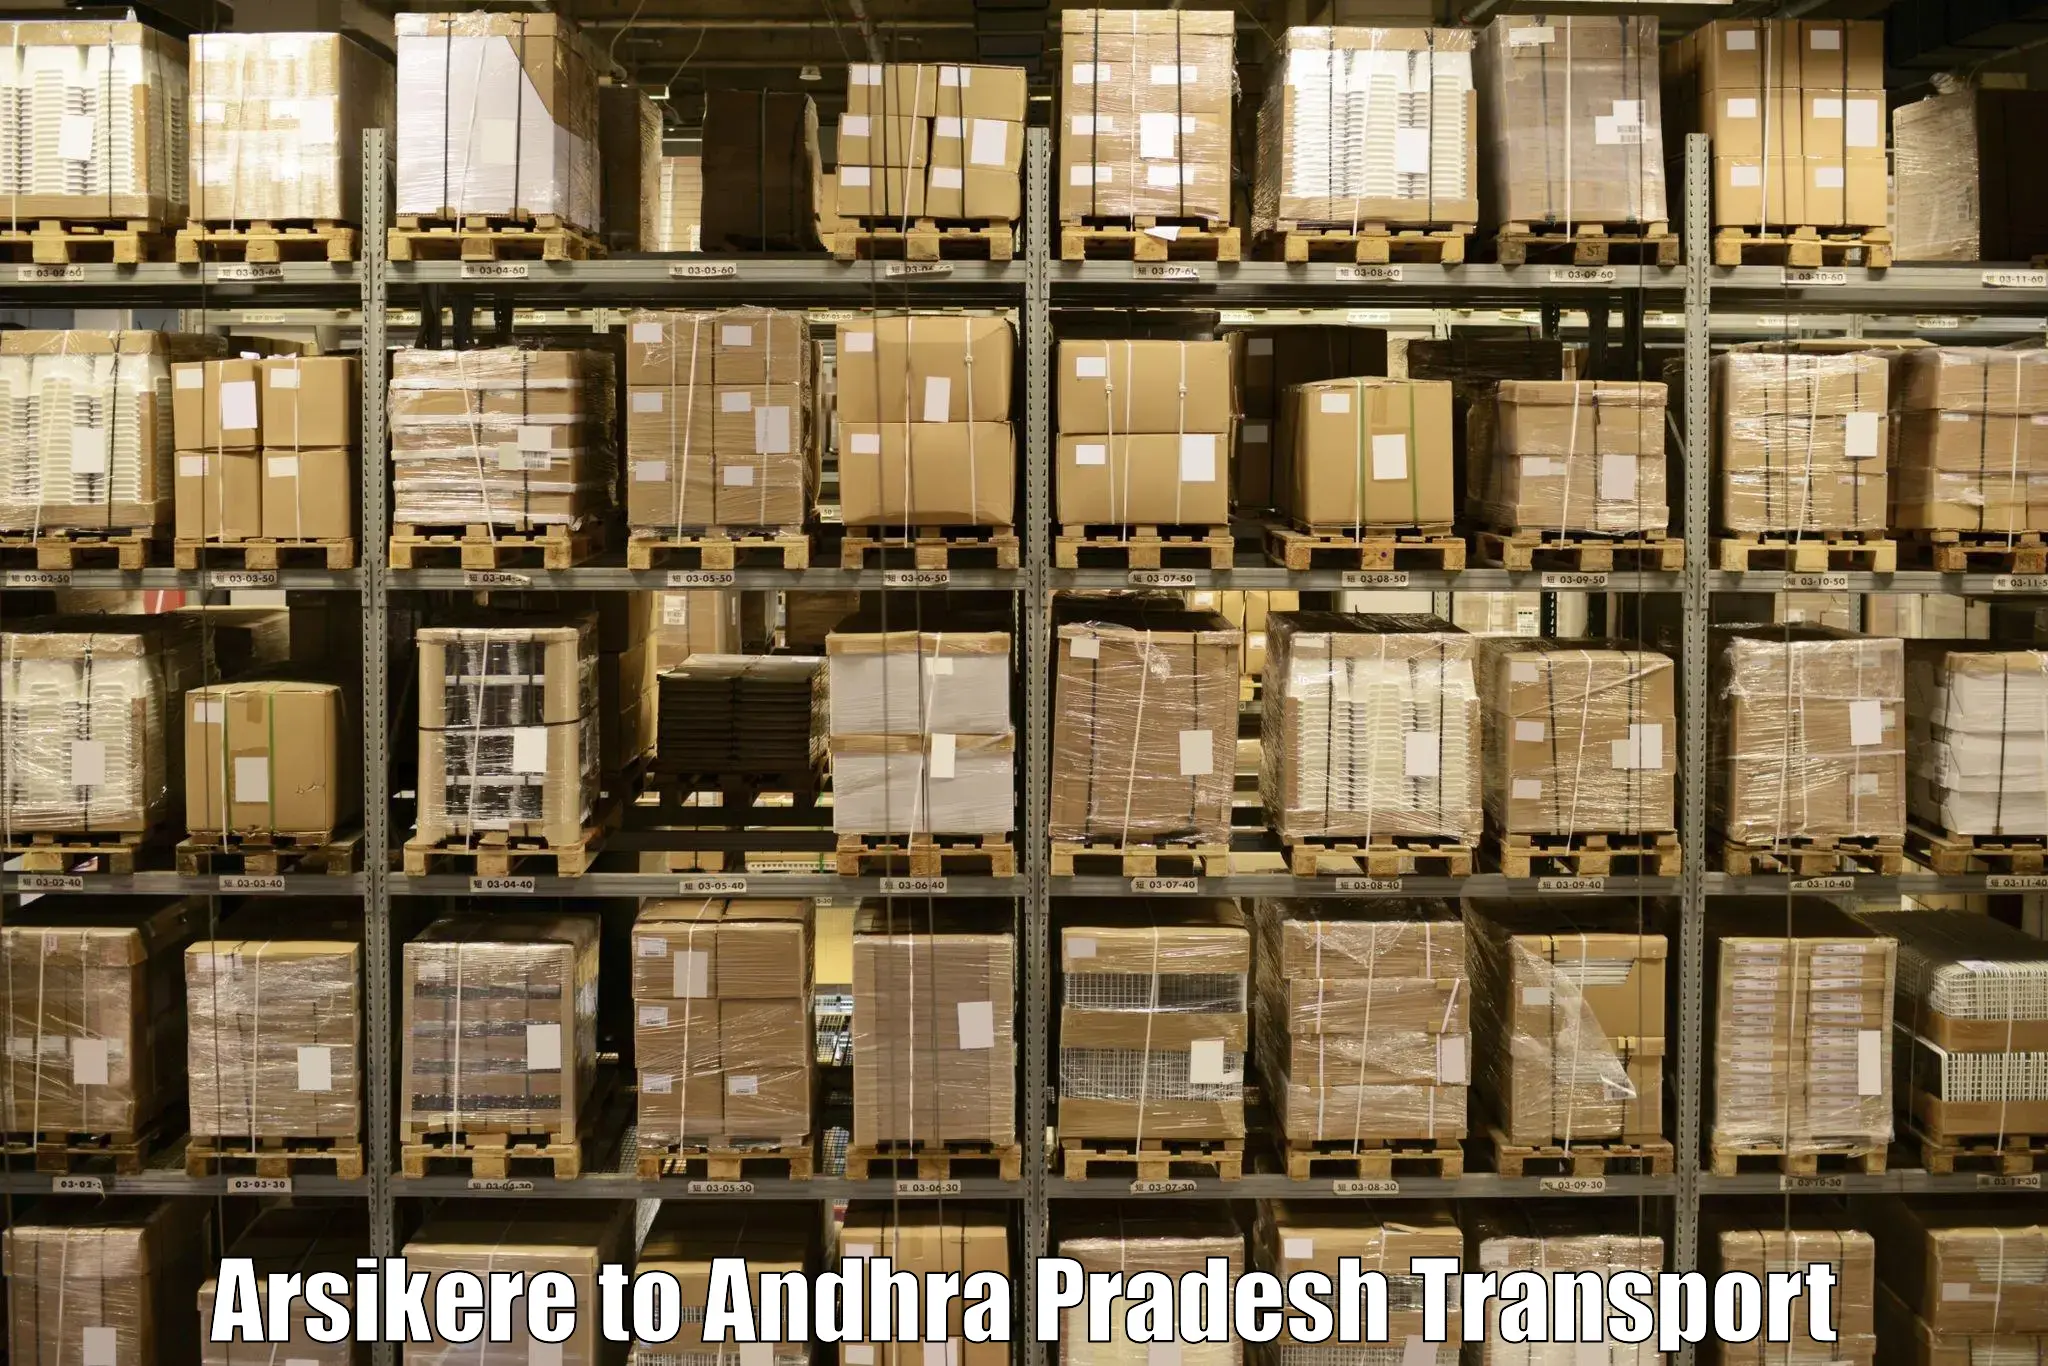 Express transport services in Arsikere to Mudigubba